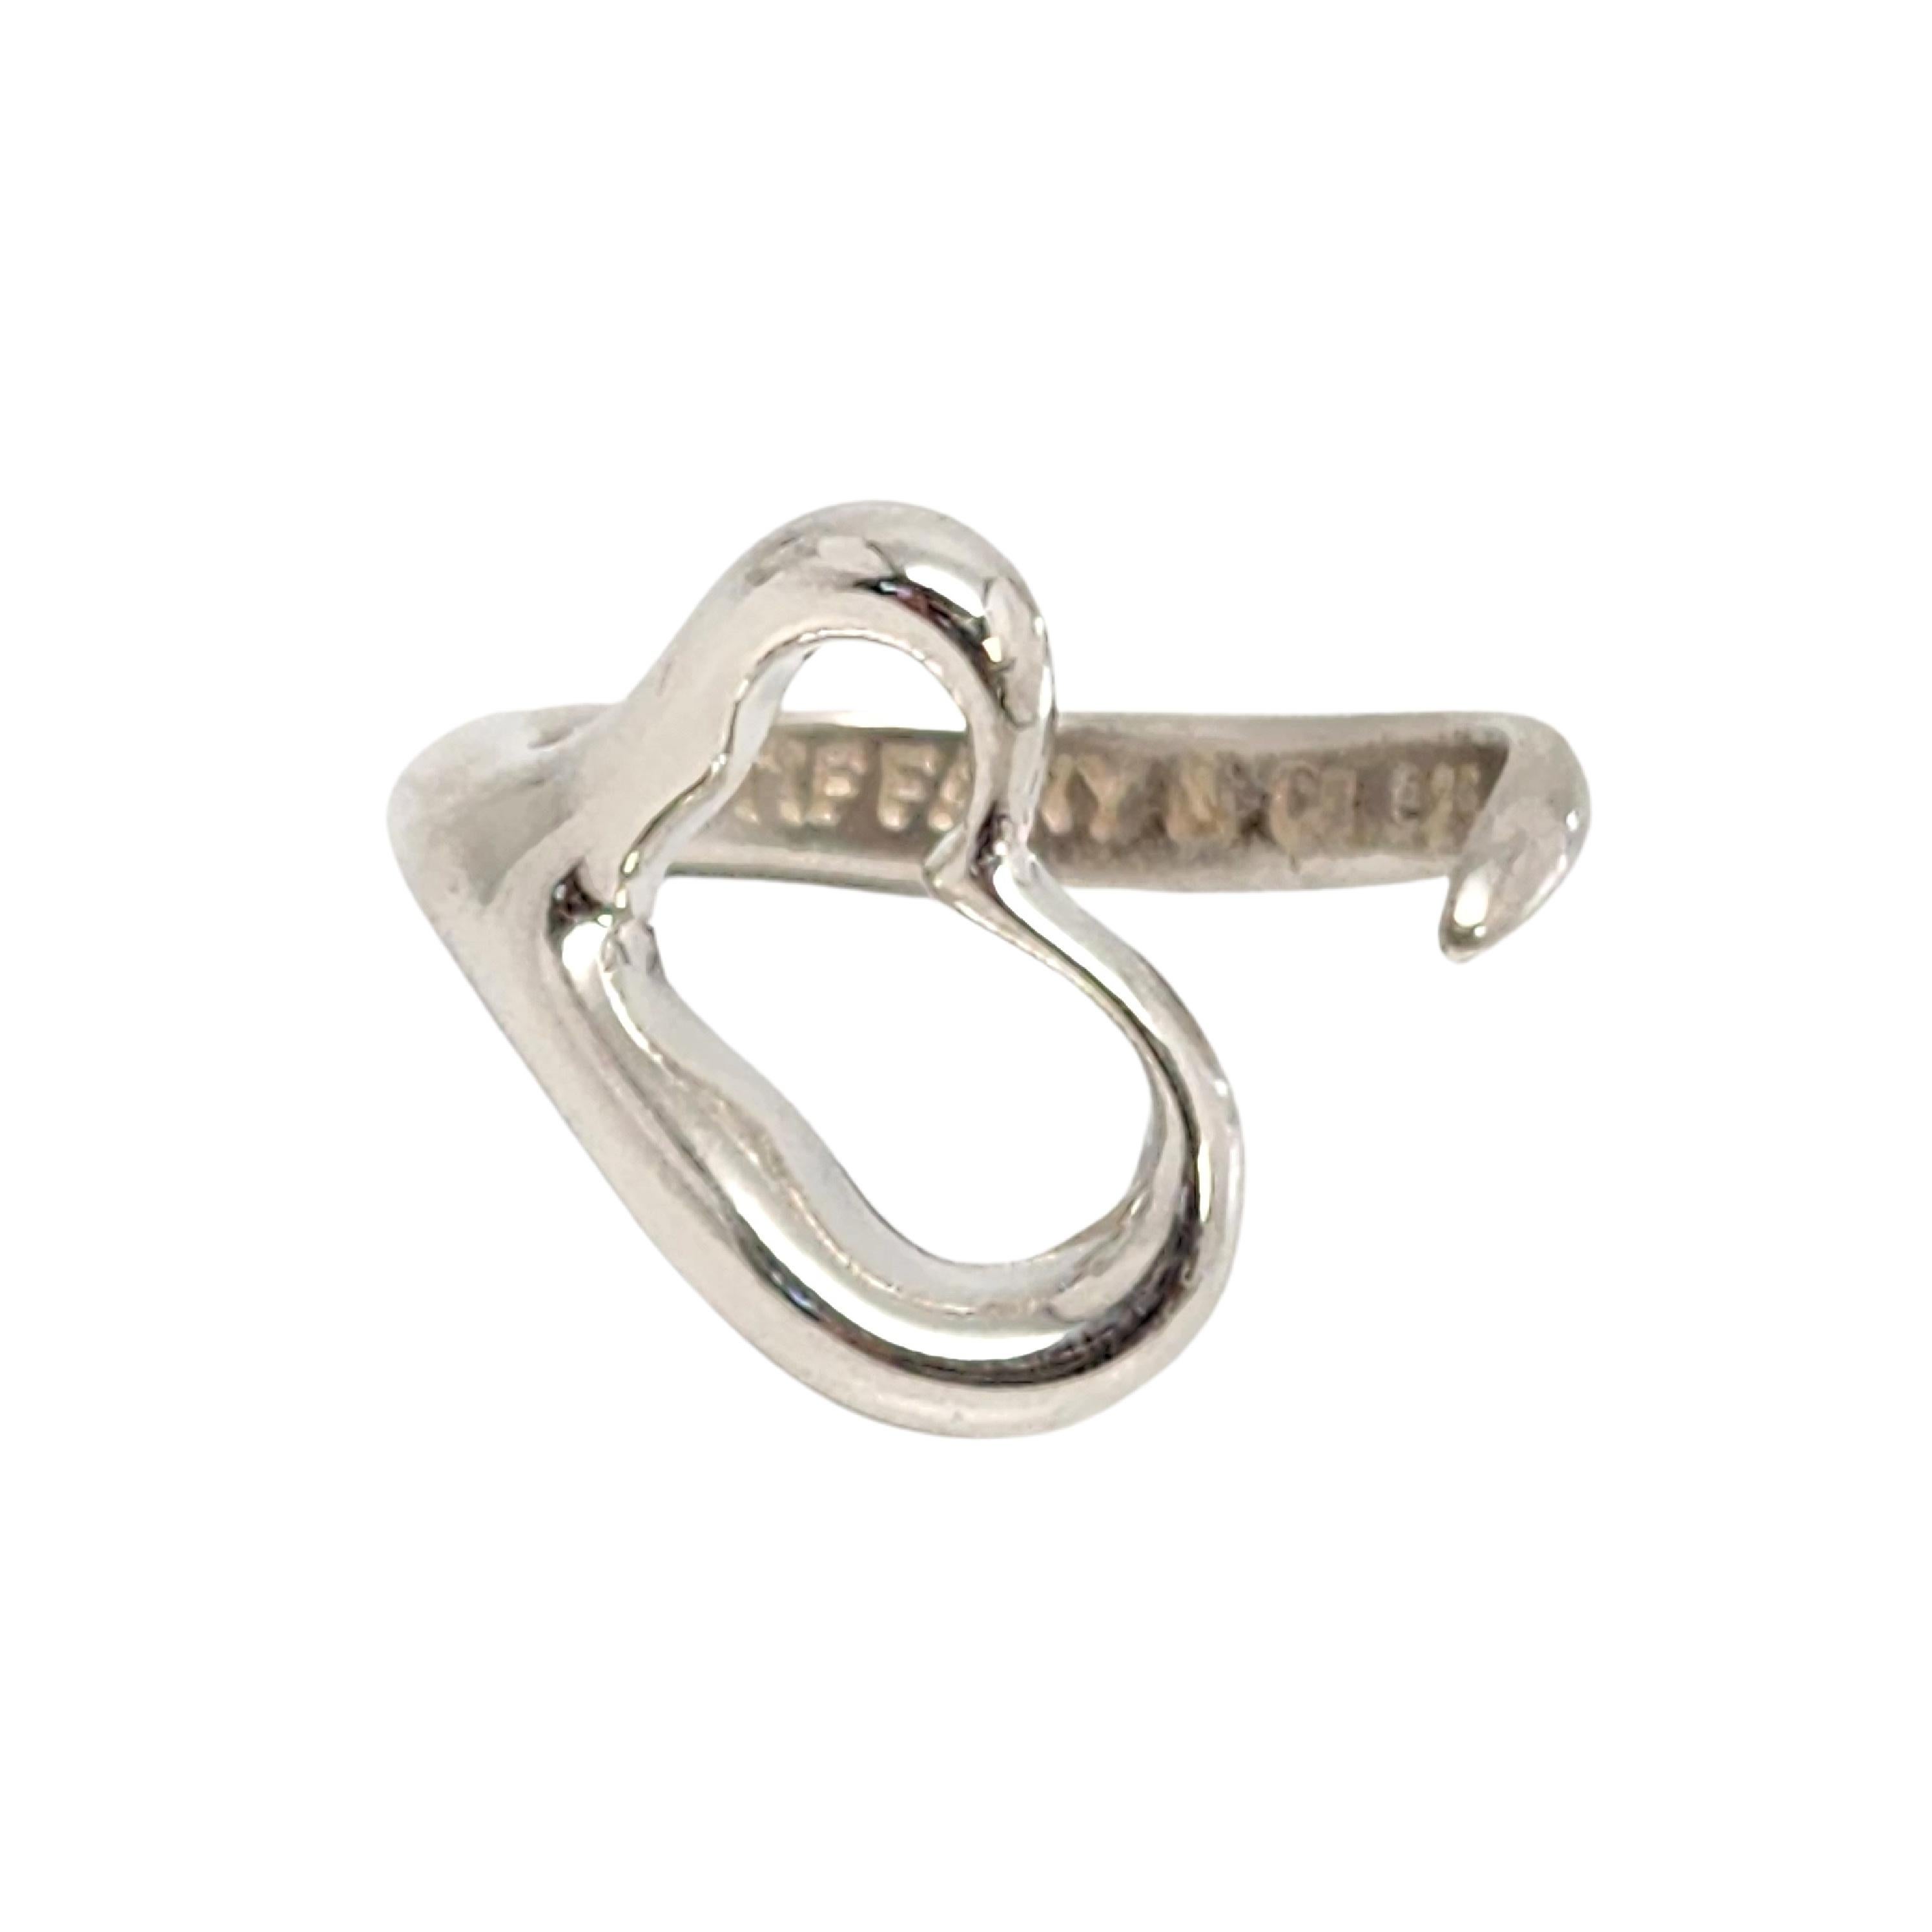 Tiffany & Co Elsa Peretti Sterling Silver Open Heart Ring Size 6 1/2 #13169 In Good Condition For Sale In Washington Depot, CT